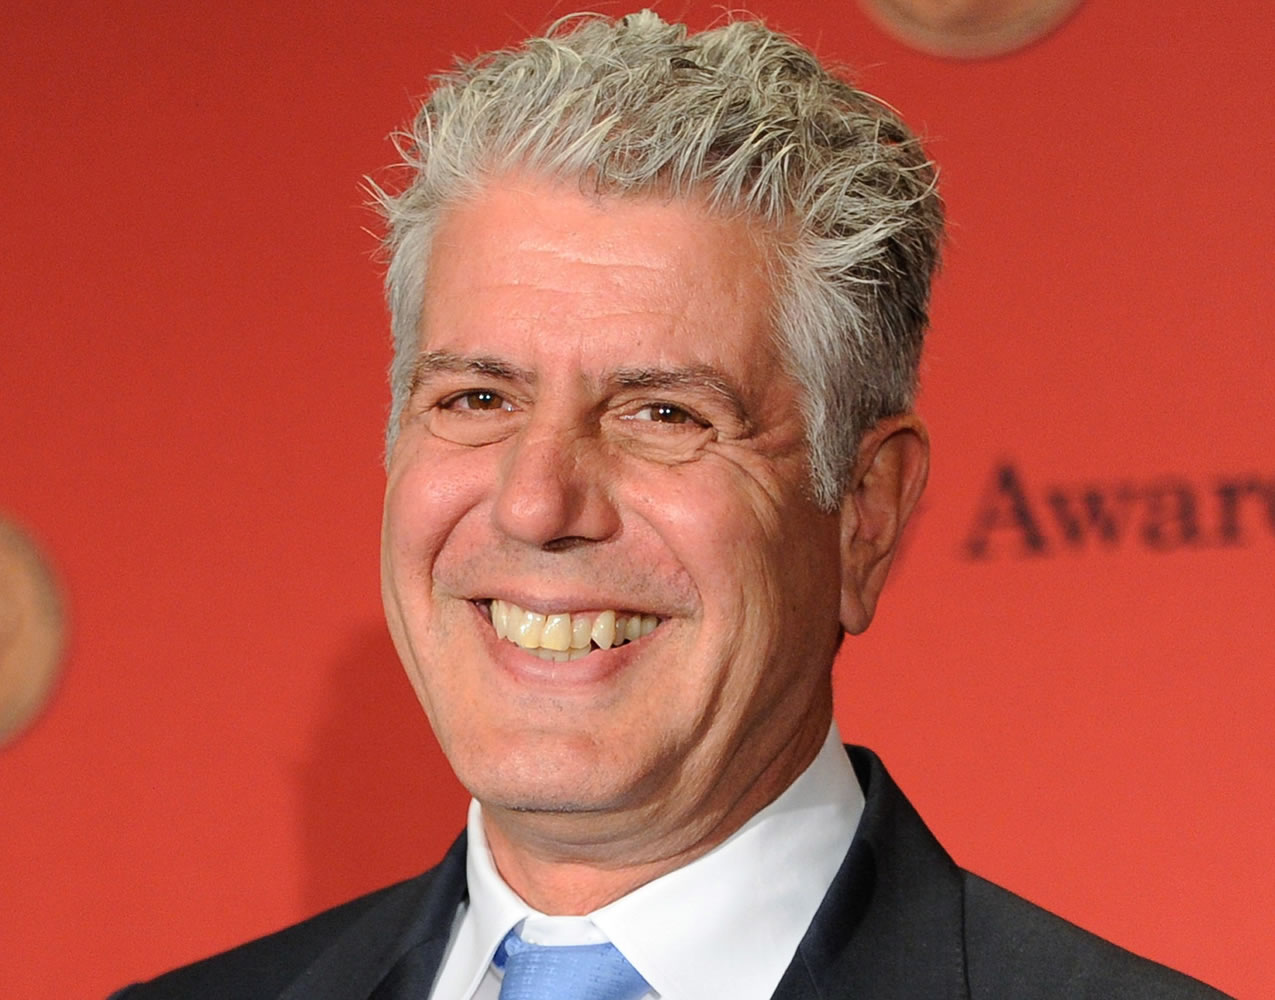 Anthony Bourdain, host of "Parts Unknown." He died in France, while working on an episode of his CNN show.